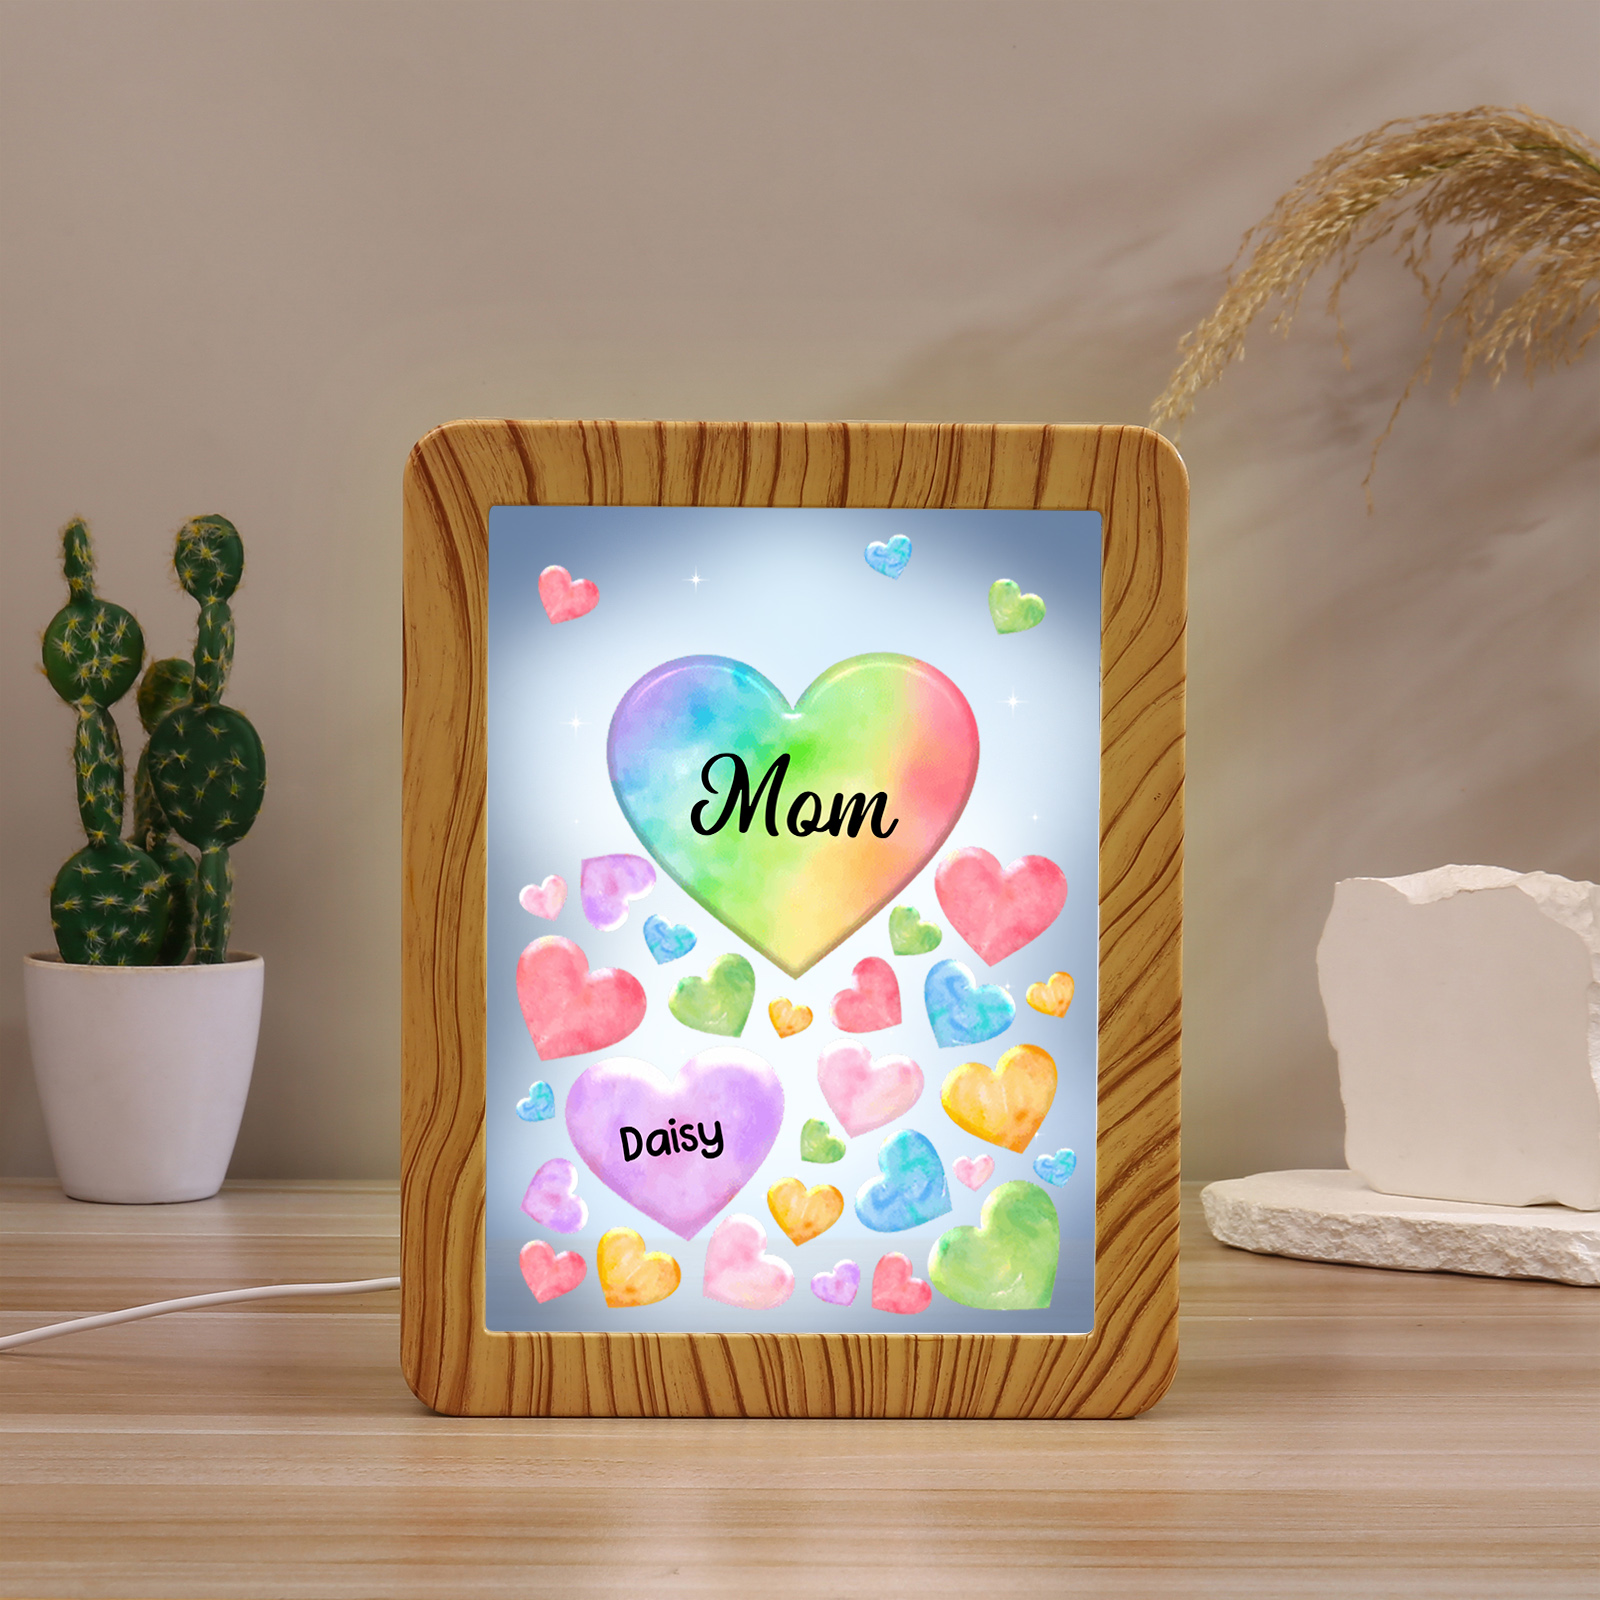 1 Name - Personalized Mum Home Wood Color Plug-in Mirror Photo Frame C